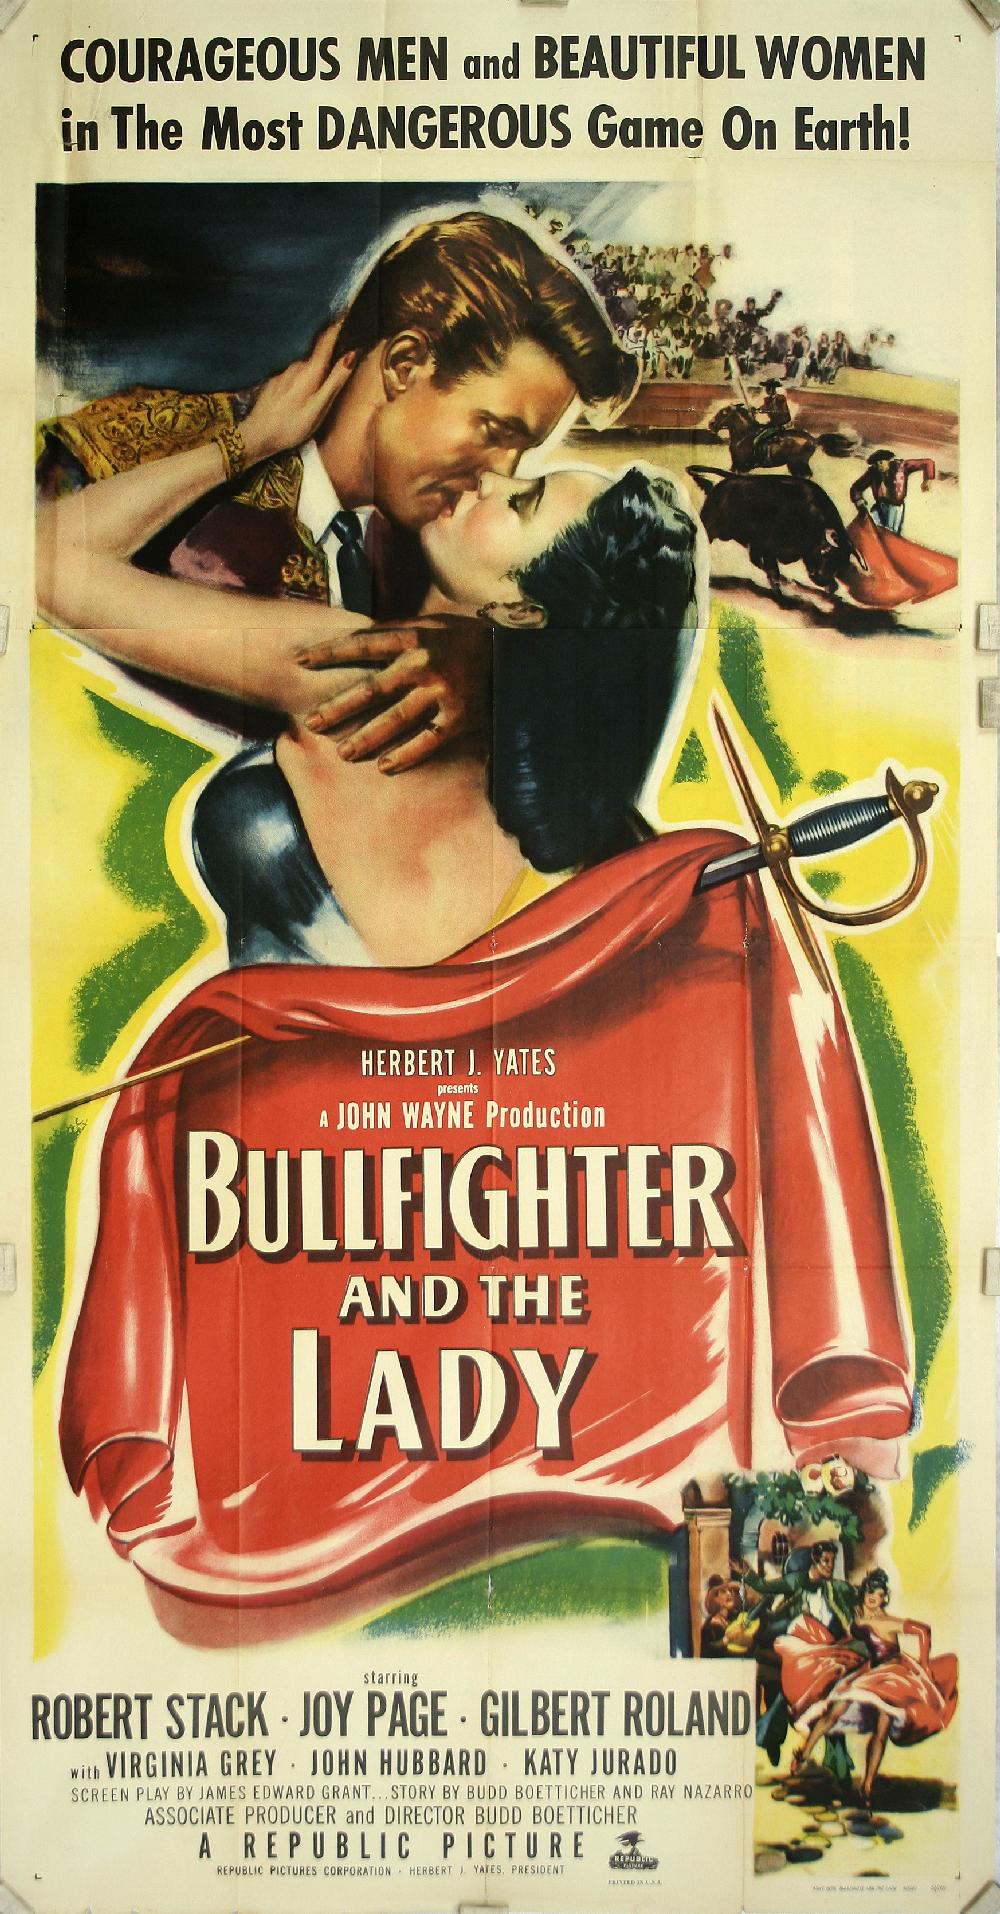 The Bullfighter and the Lady (1951)